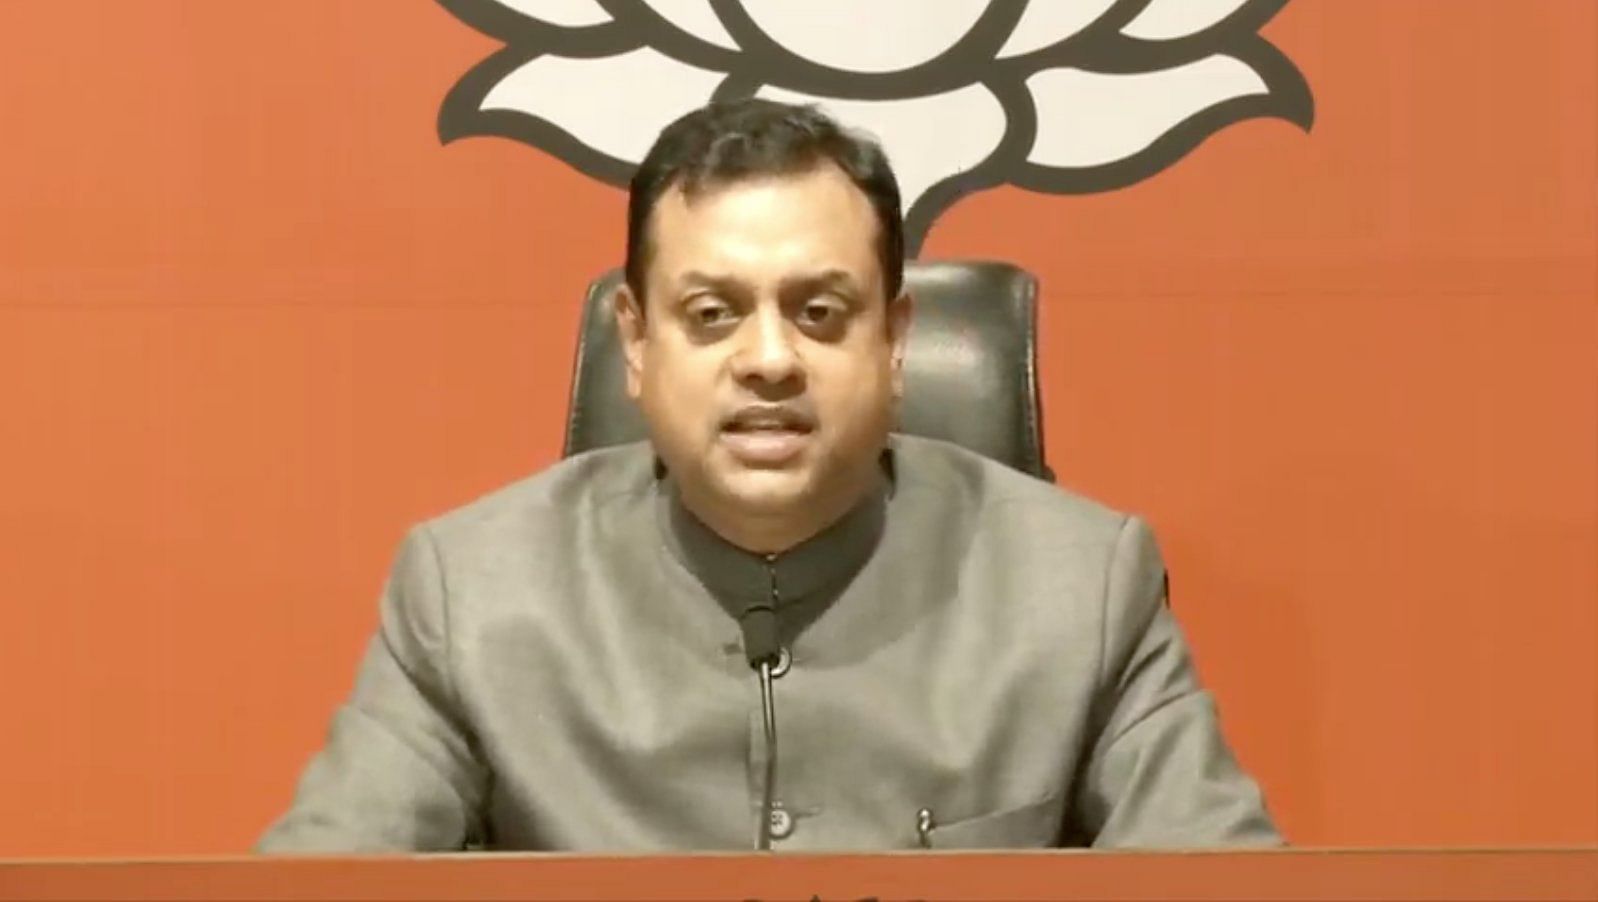 BJP Spokesperson Sambit Patra claimed that it shows the opposition party has nothing to do with people belonging to other religions, including Hindus. (Twitter image/@BJP4India)